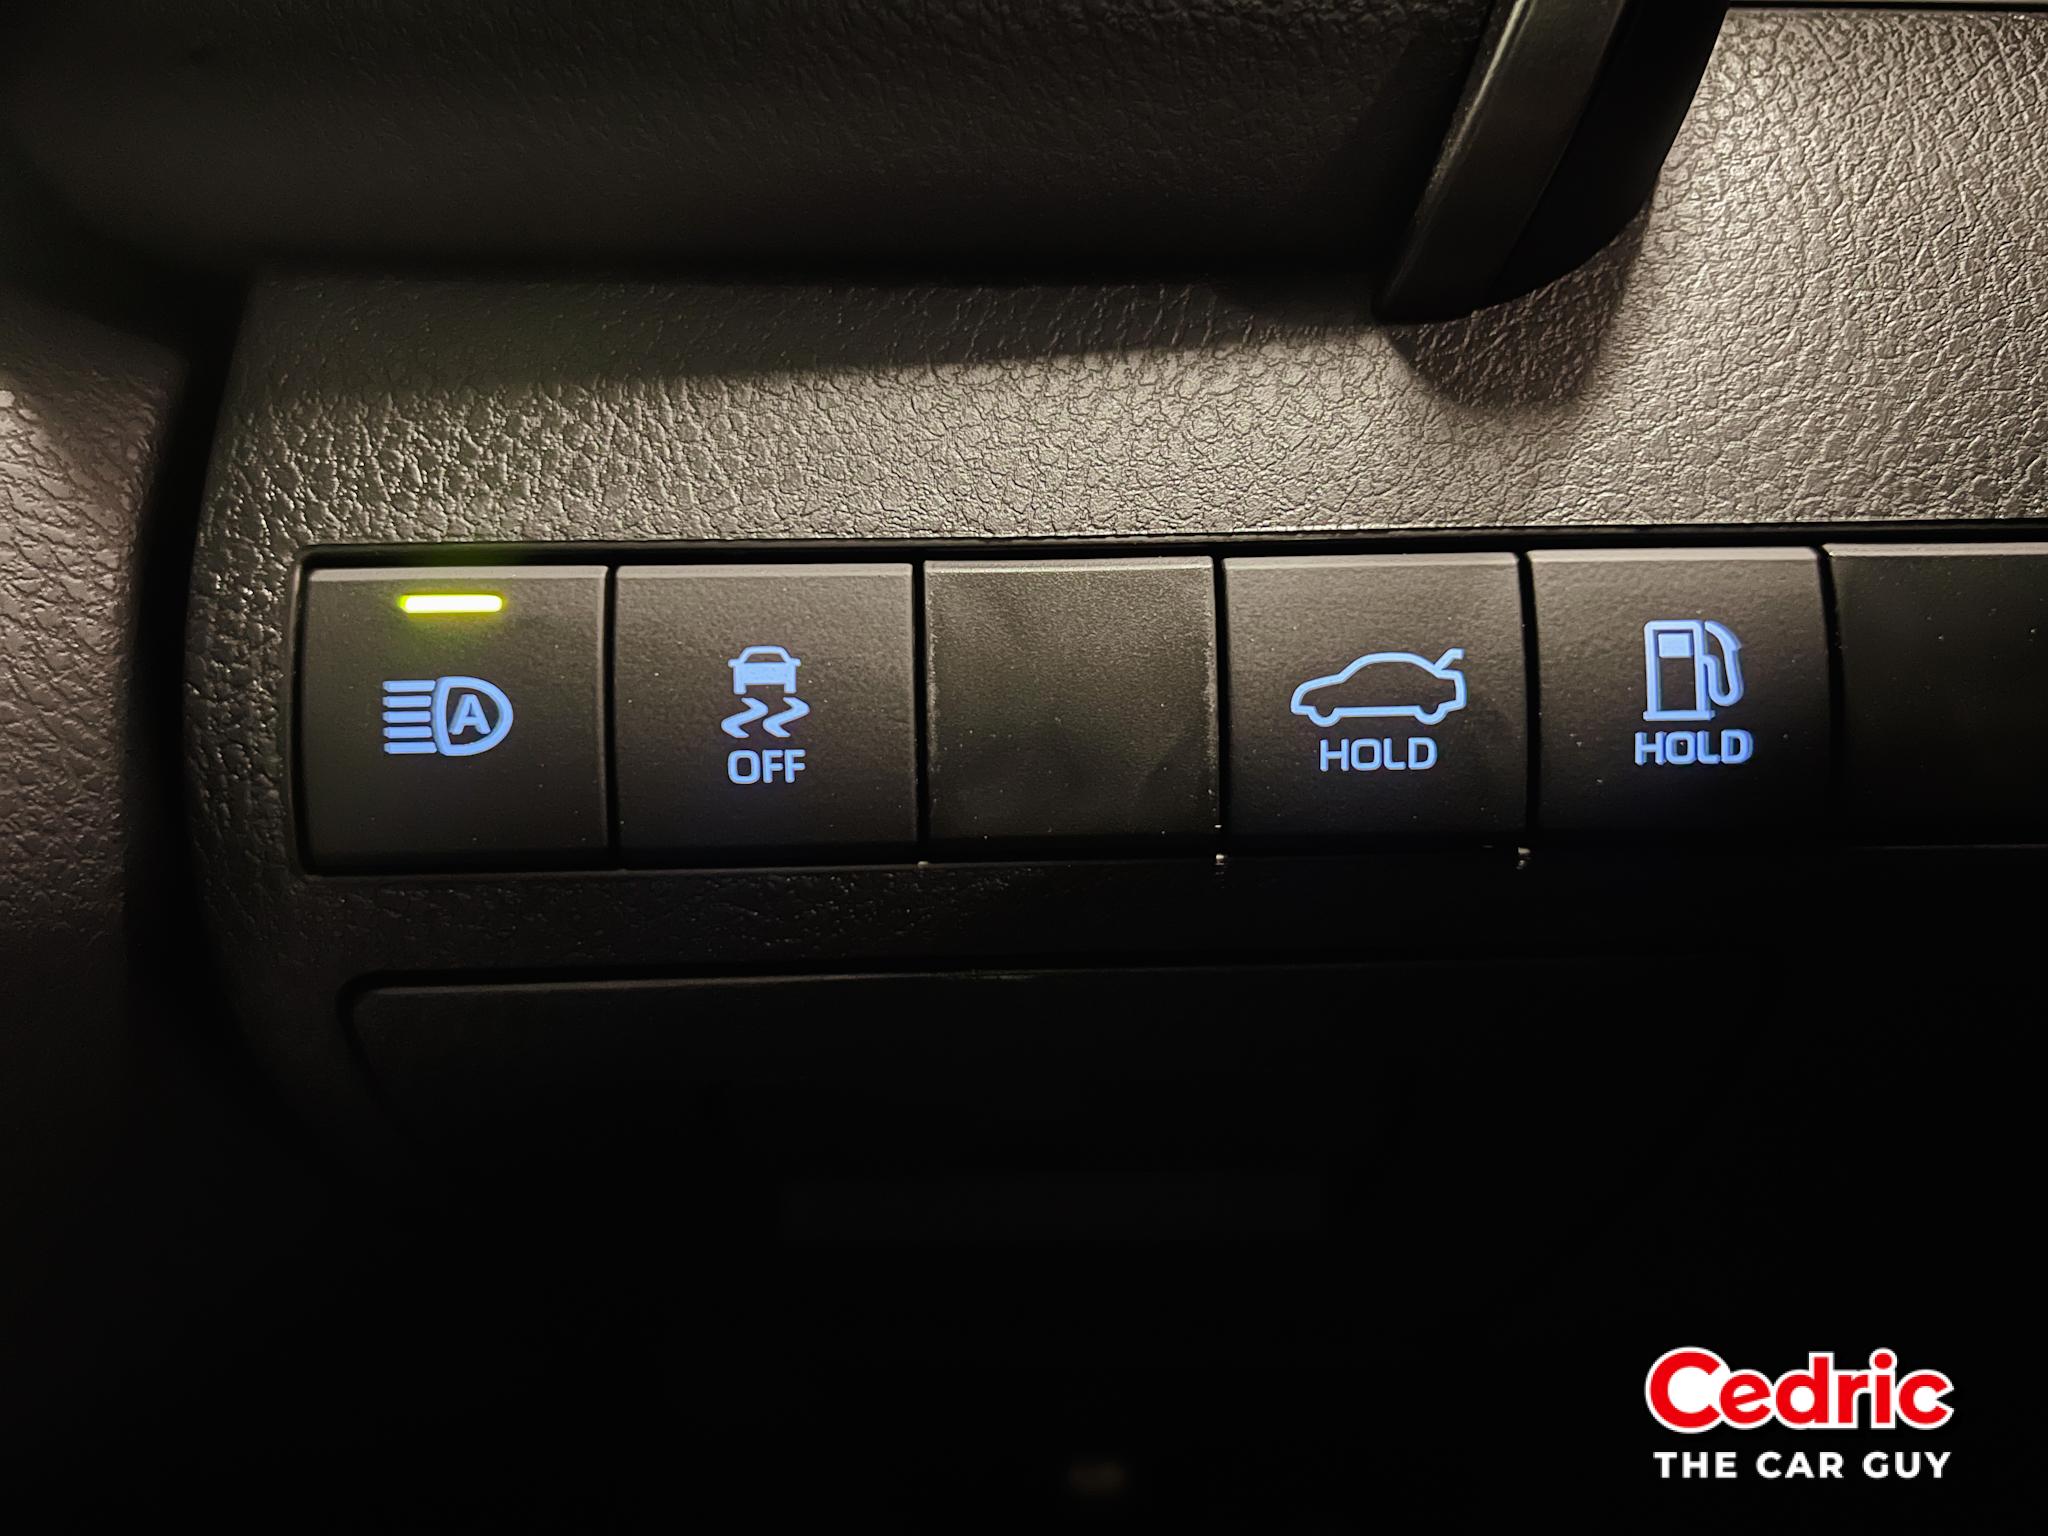 Console switch controlling the automatic high beams, traction control, trunk, and gas door release switches